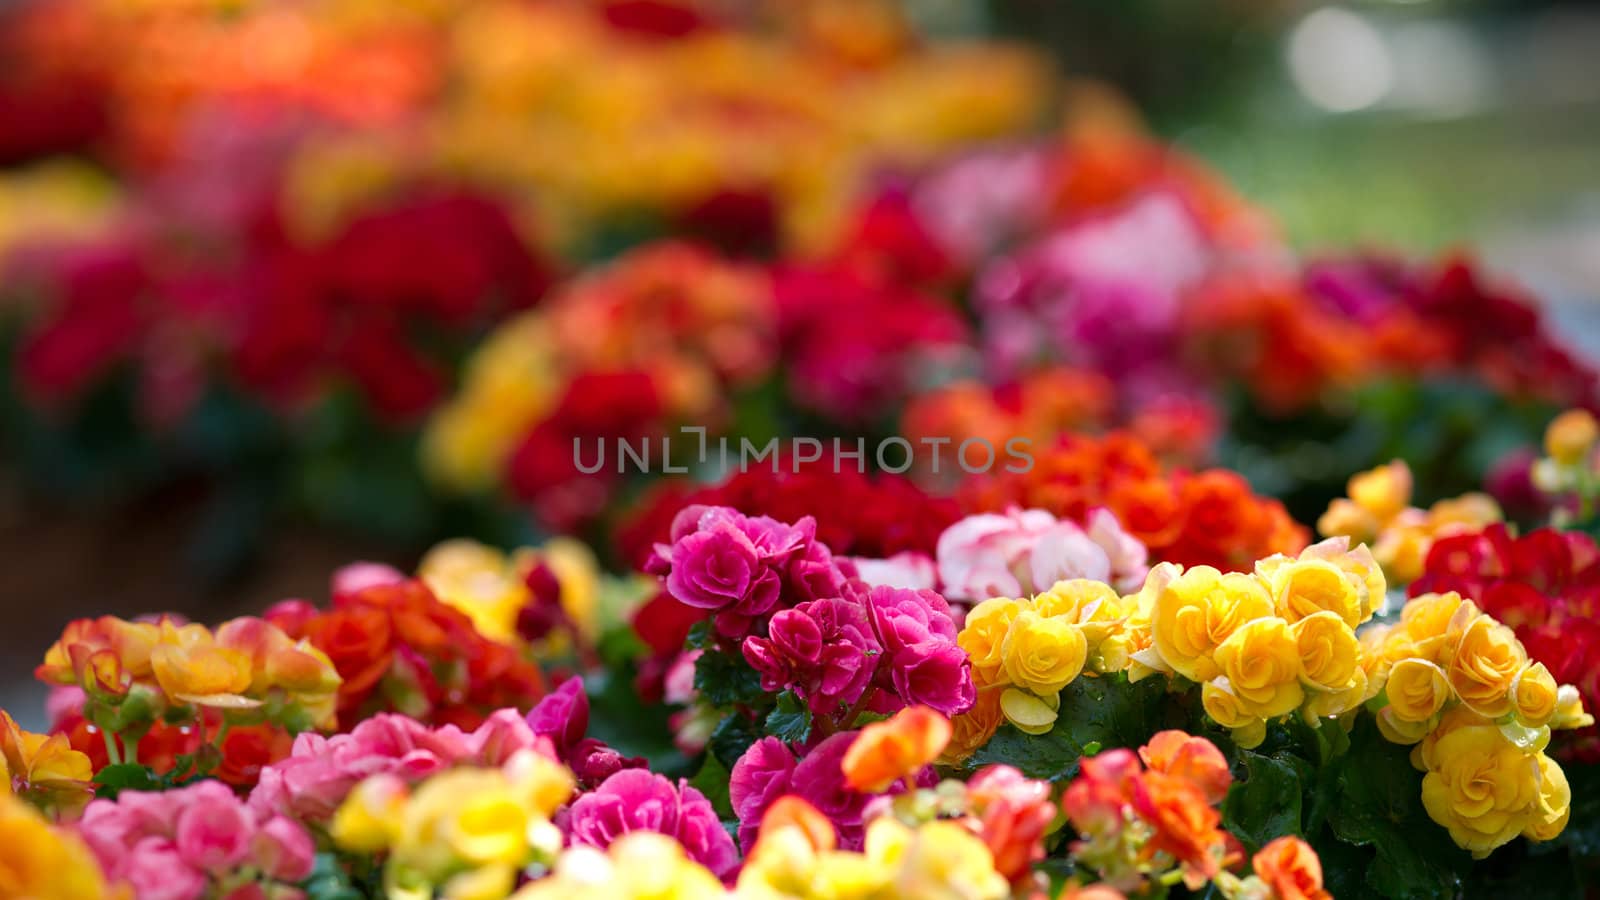 Flowerbed by timbrk